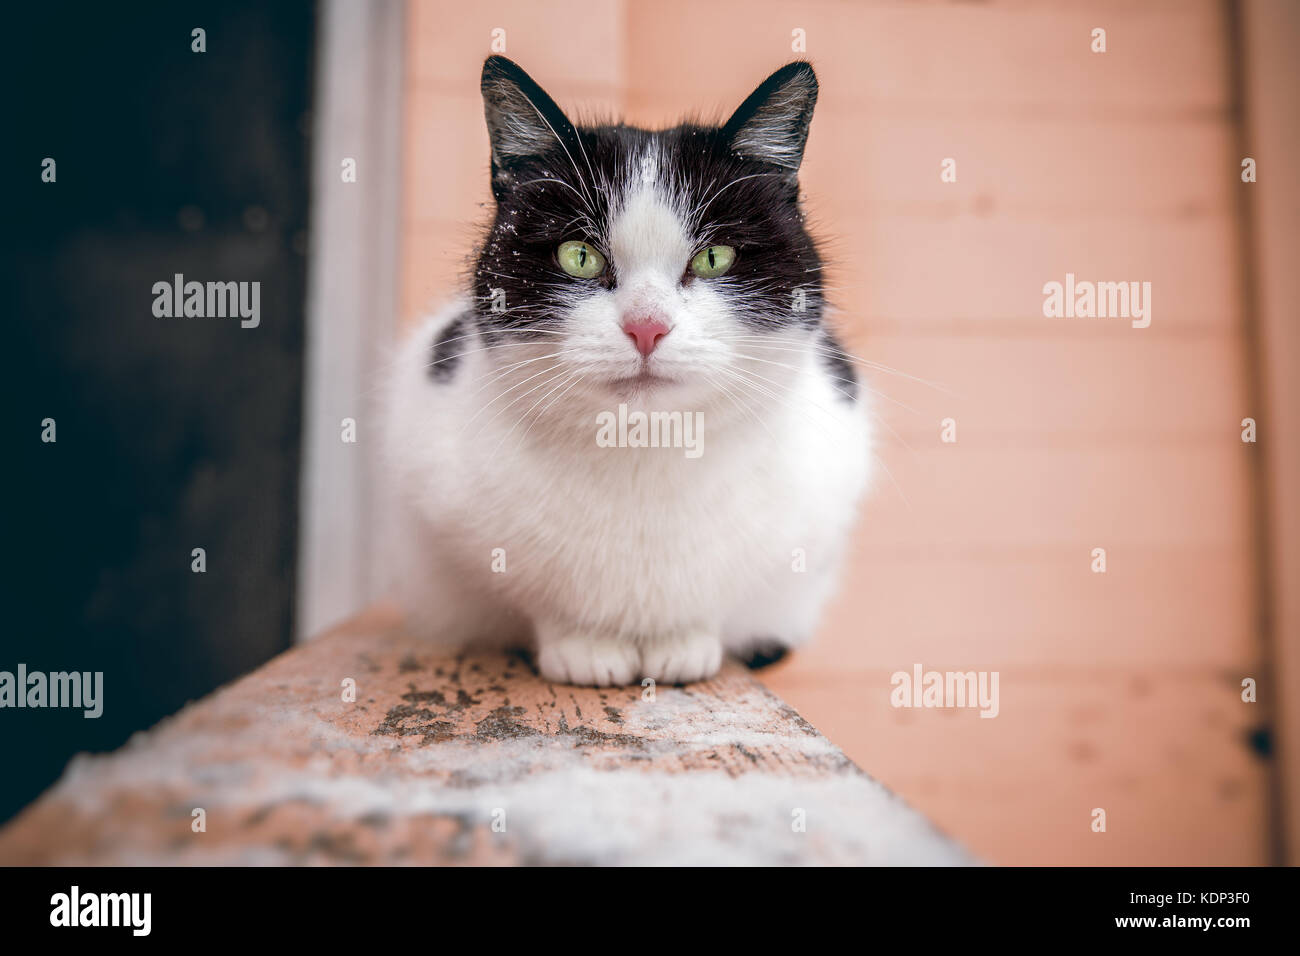 A large black and white cat with green eyes is sitting on the railing of the stairs at the entrance of the house and looks into the frame. Close-up. B Stock Photo